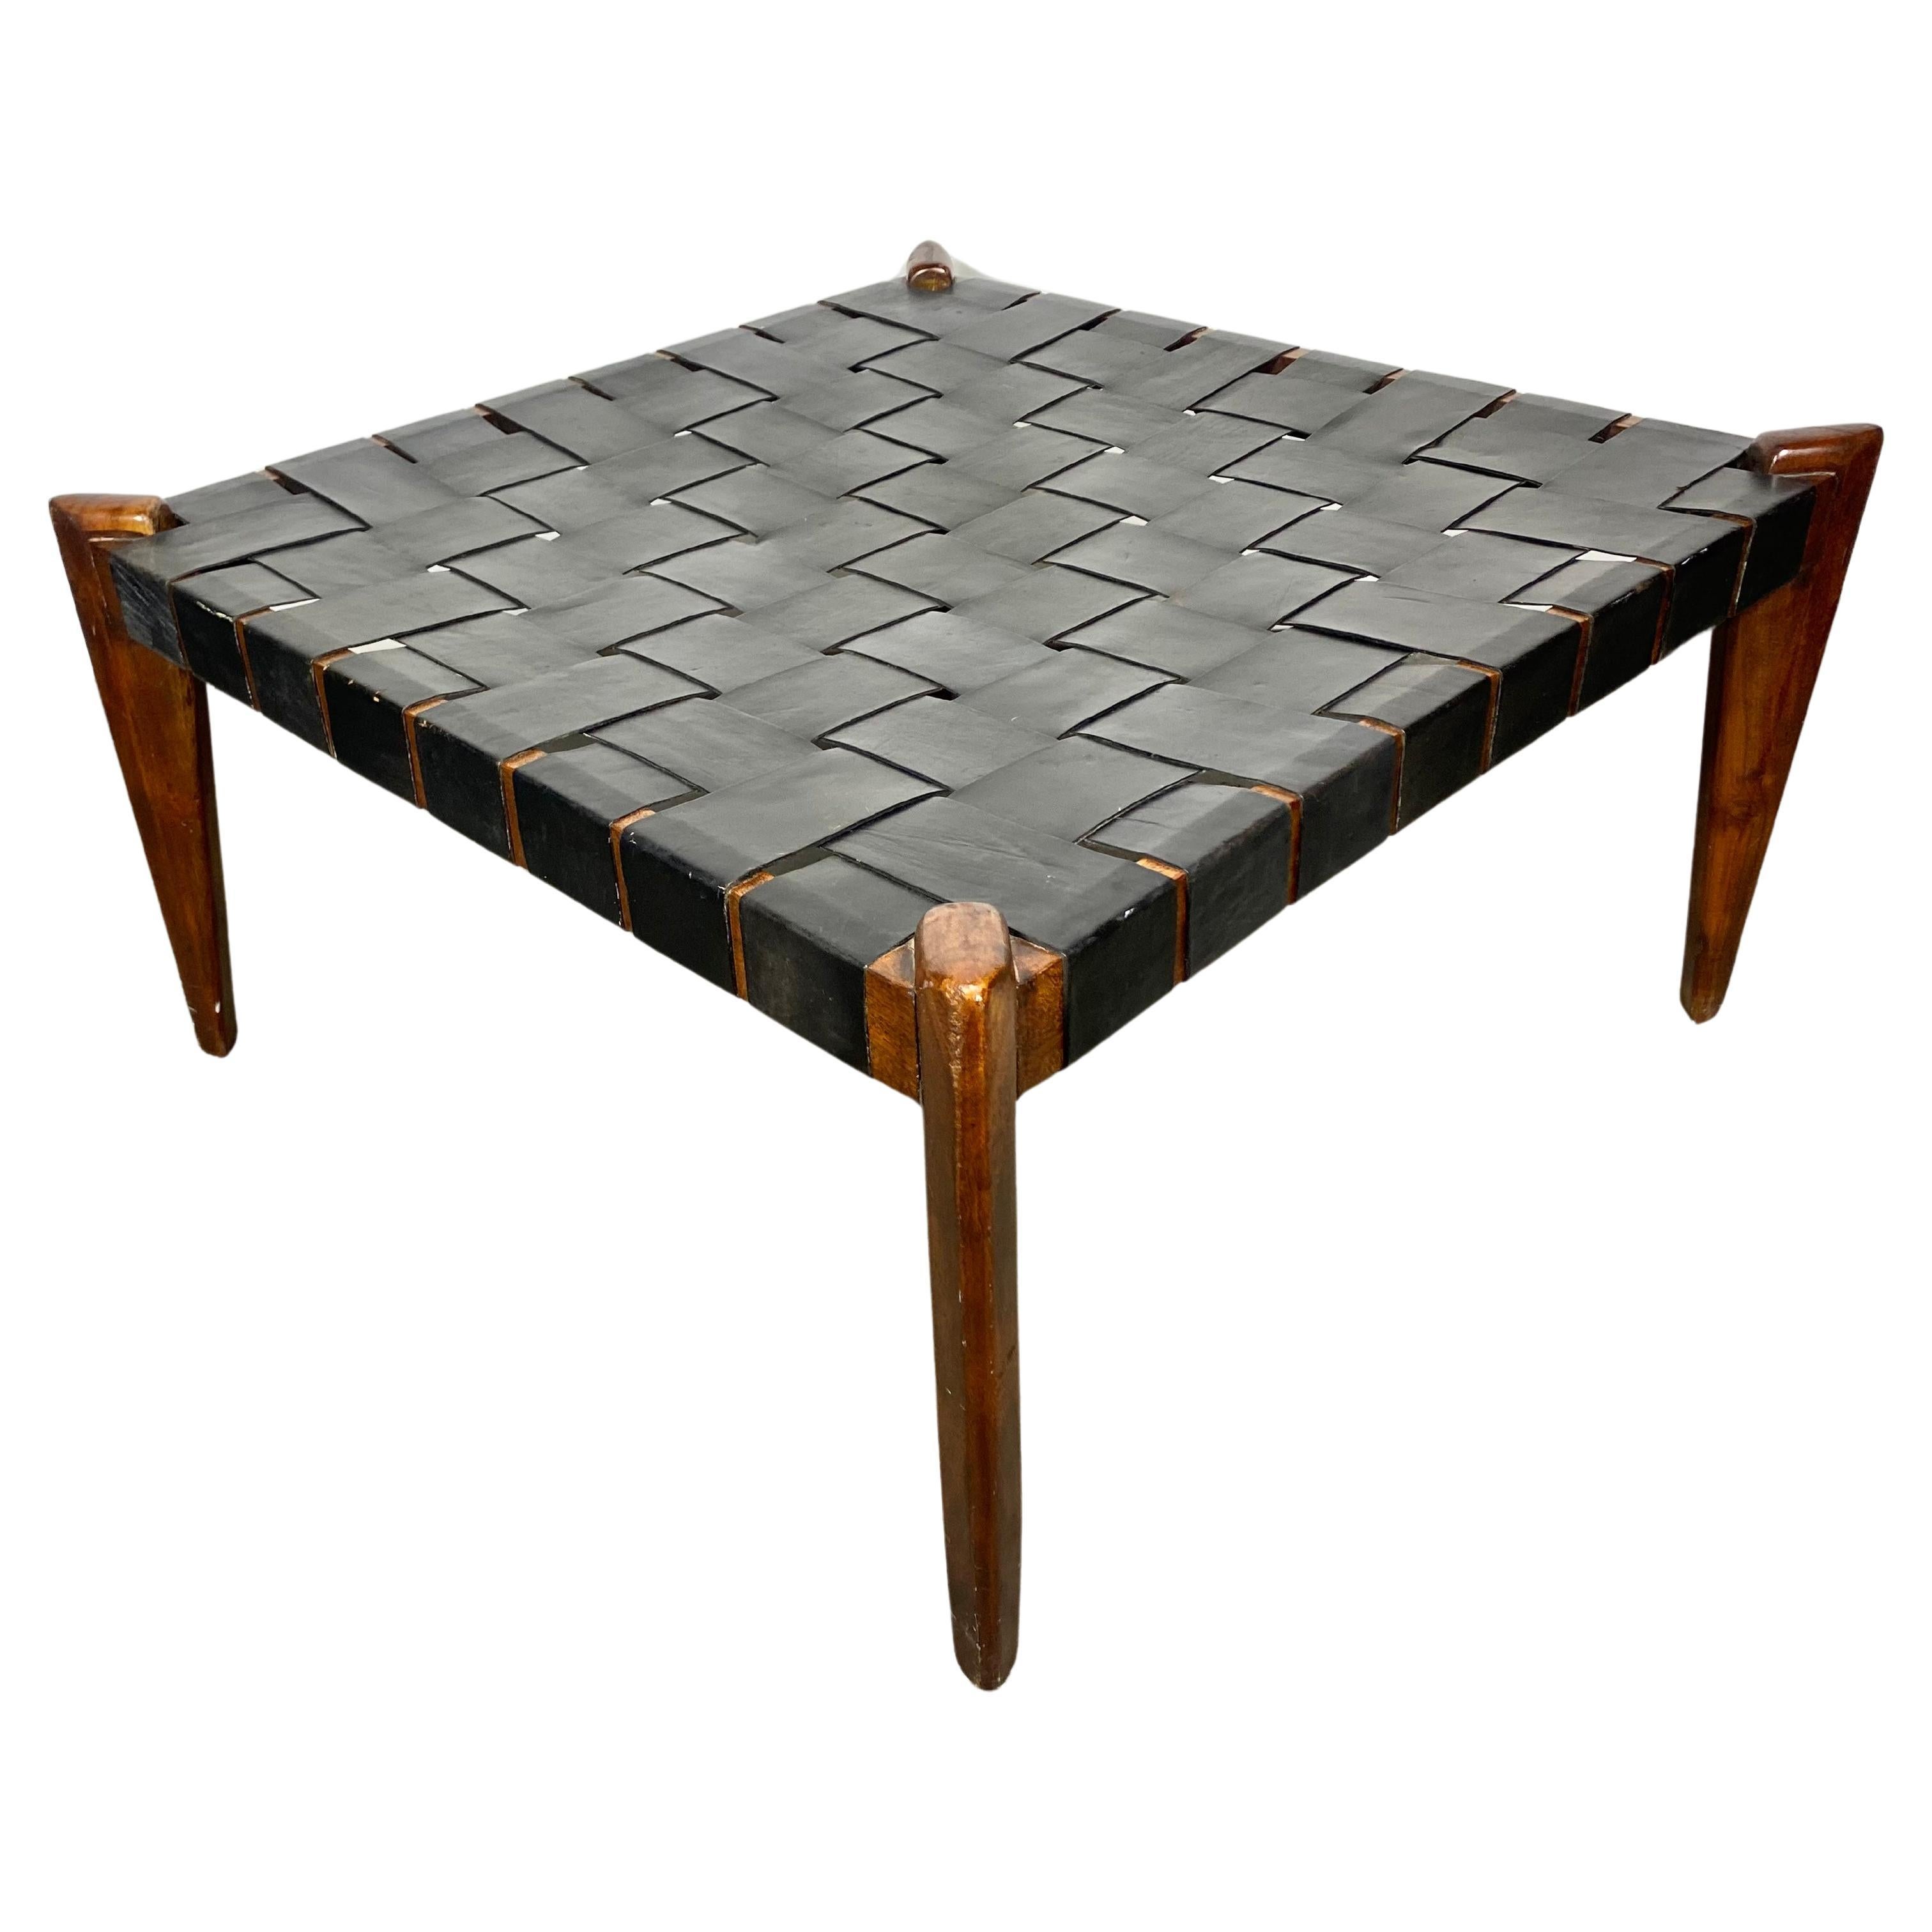  Modernist Woven Leather / Rosewood  Table , Ottoman  by Edmond Spence